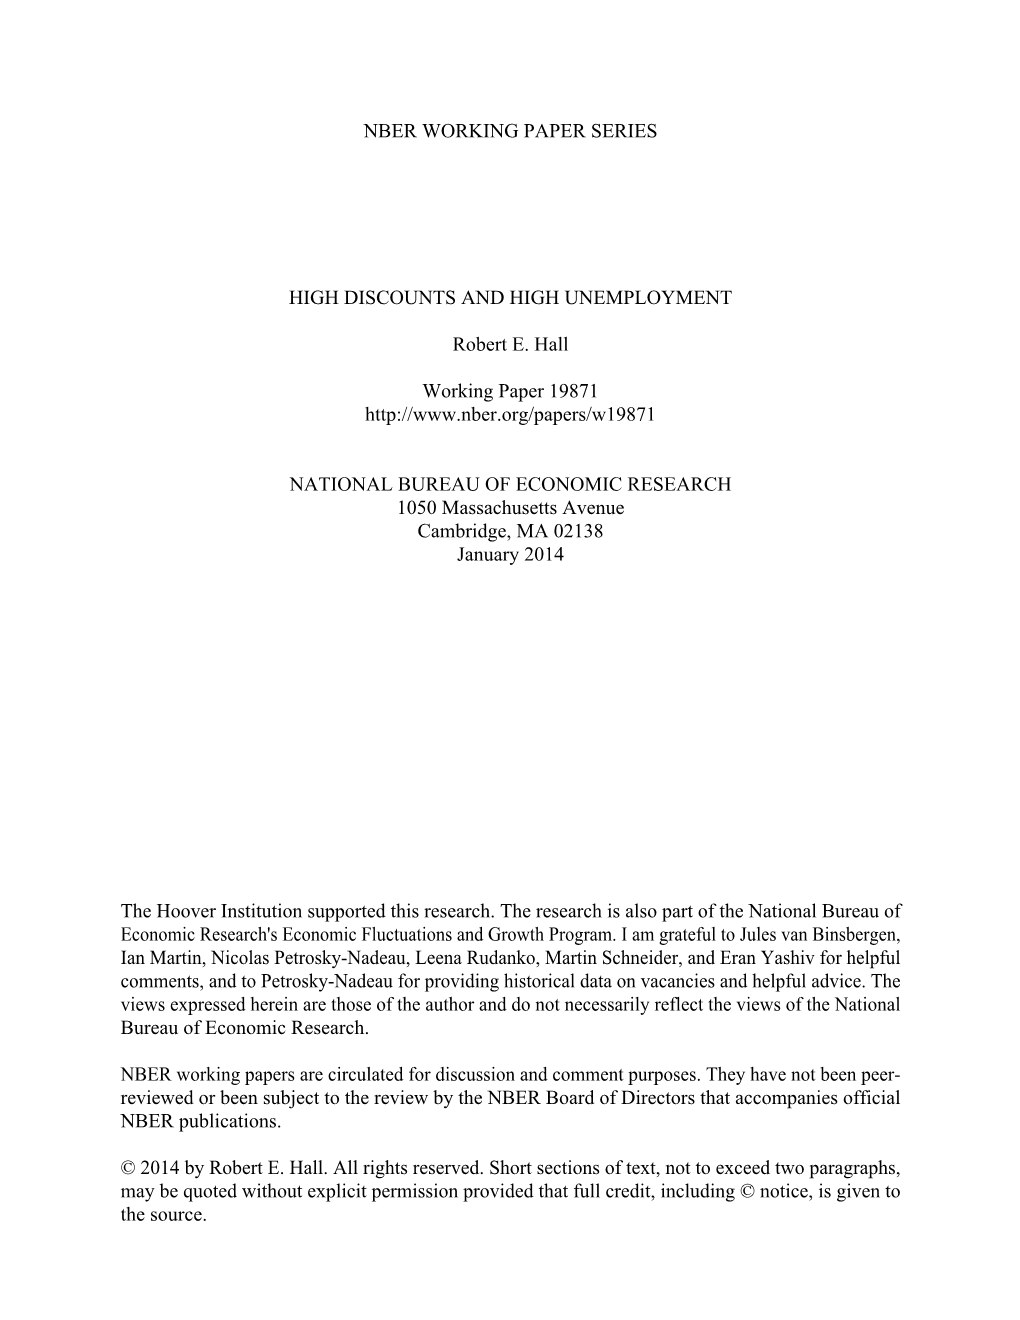 Nber Working Paper Series High Discounts and High